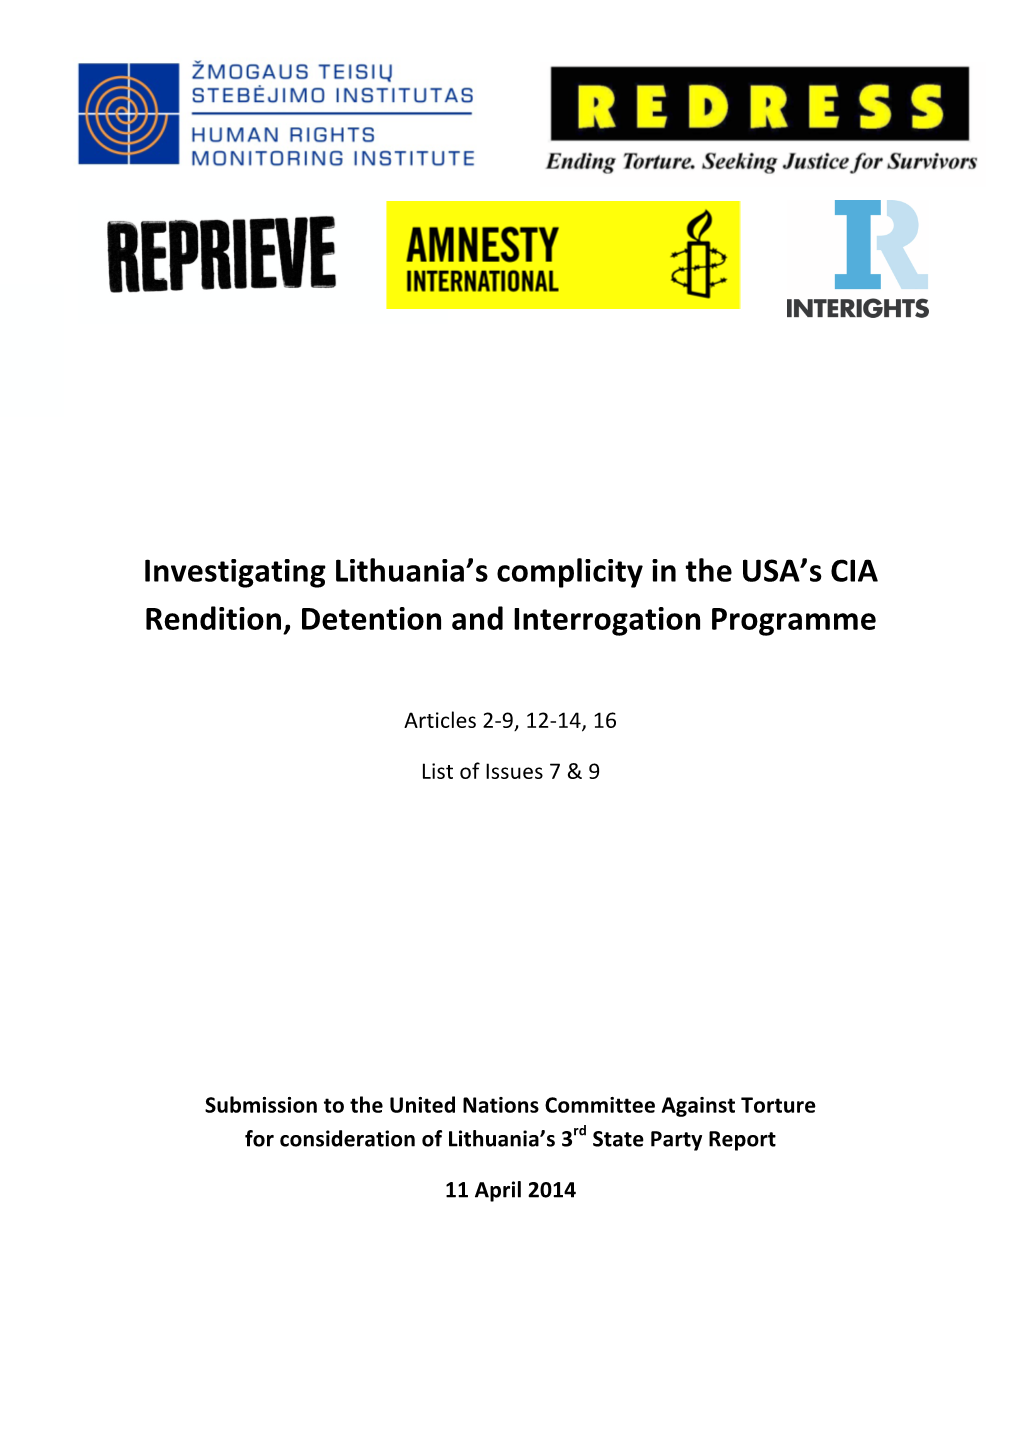 Investigating Lithuania's Complicity in the USA's CIA Rendition, Detention